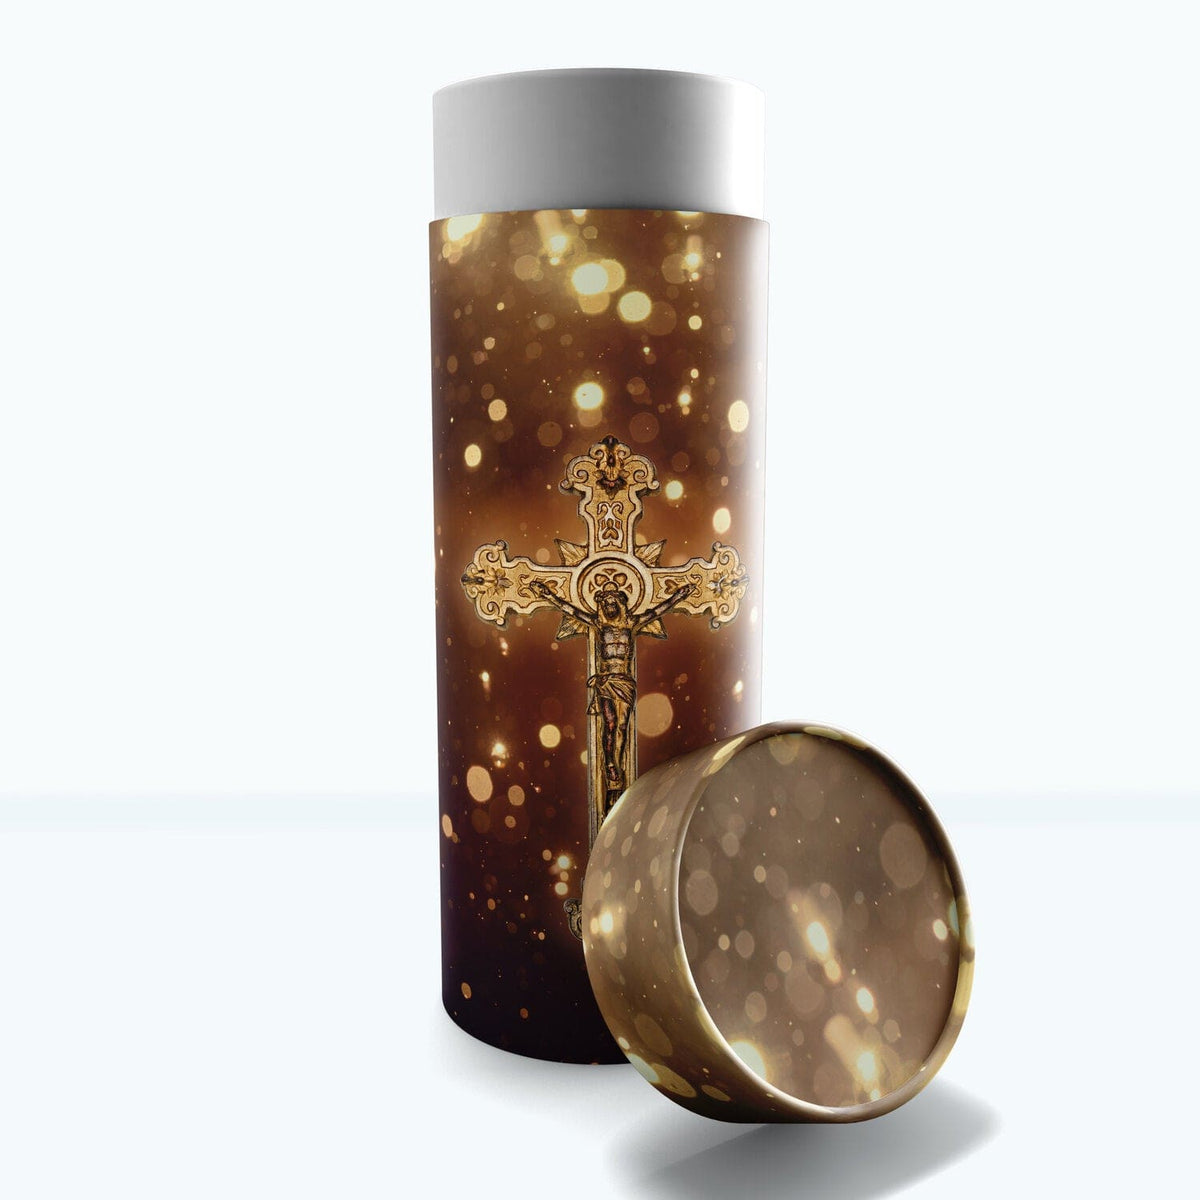 Commemorative Cremation Urns Medium Our Lord and Savior (Gold) - Biodegradable &amp; Eco Friendly Burial or Scattering Urn / Tube